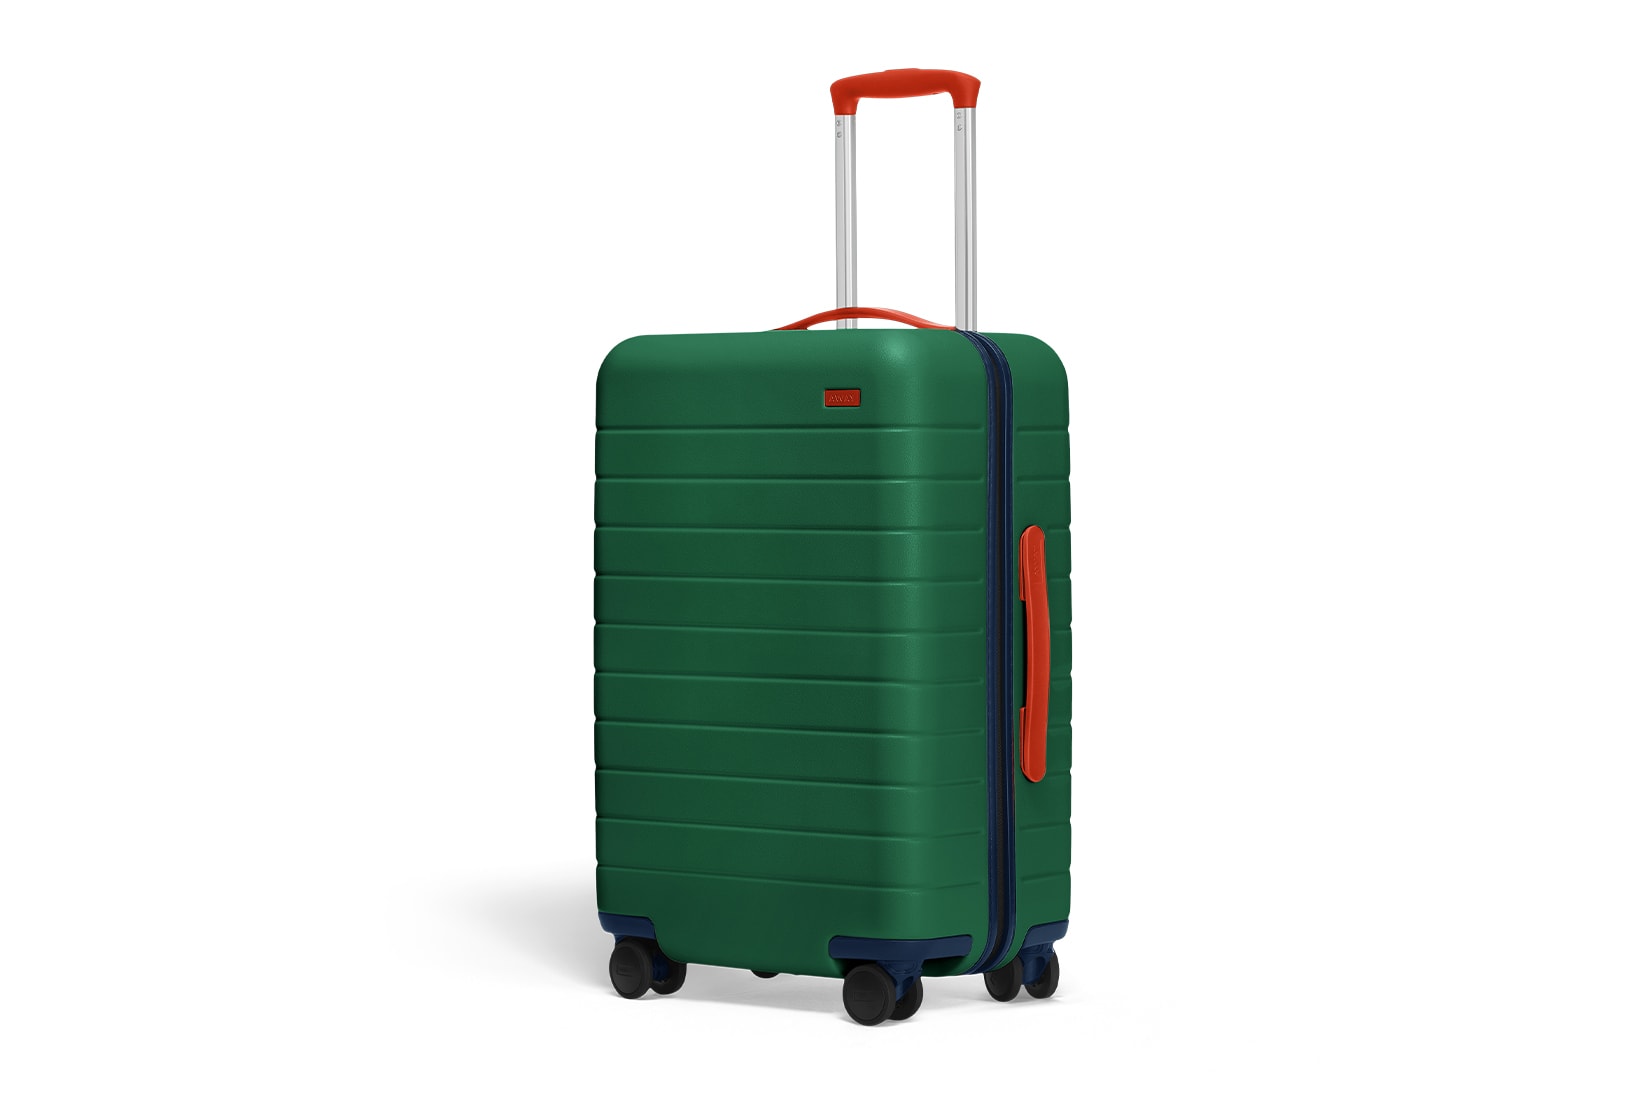 away technicolor collection suitcases the bigger carry on tropic